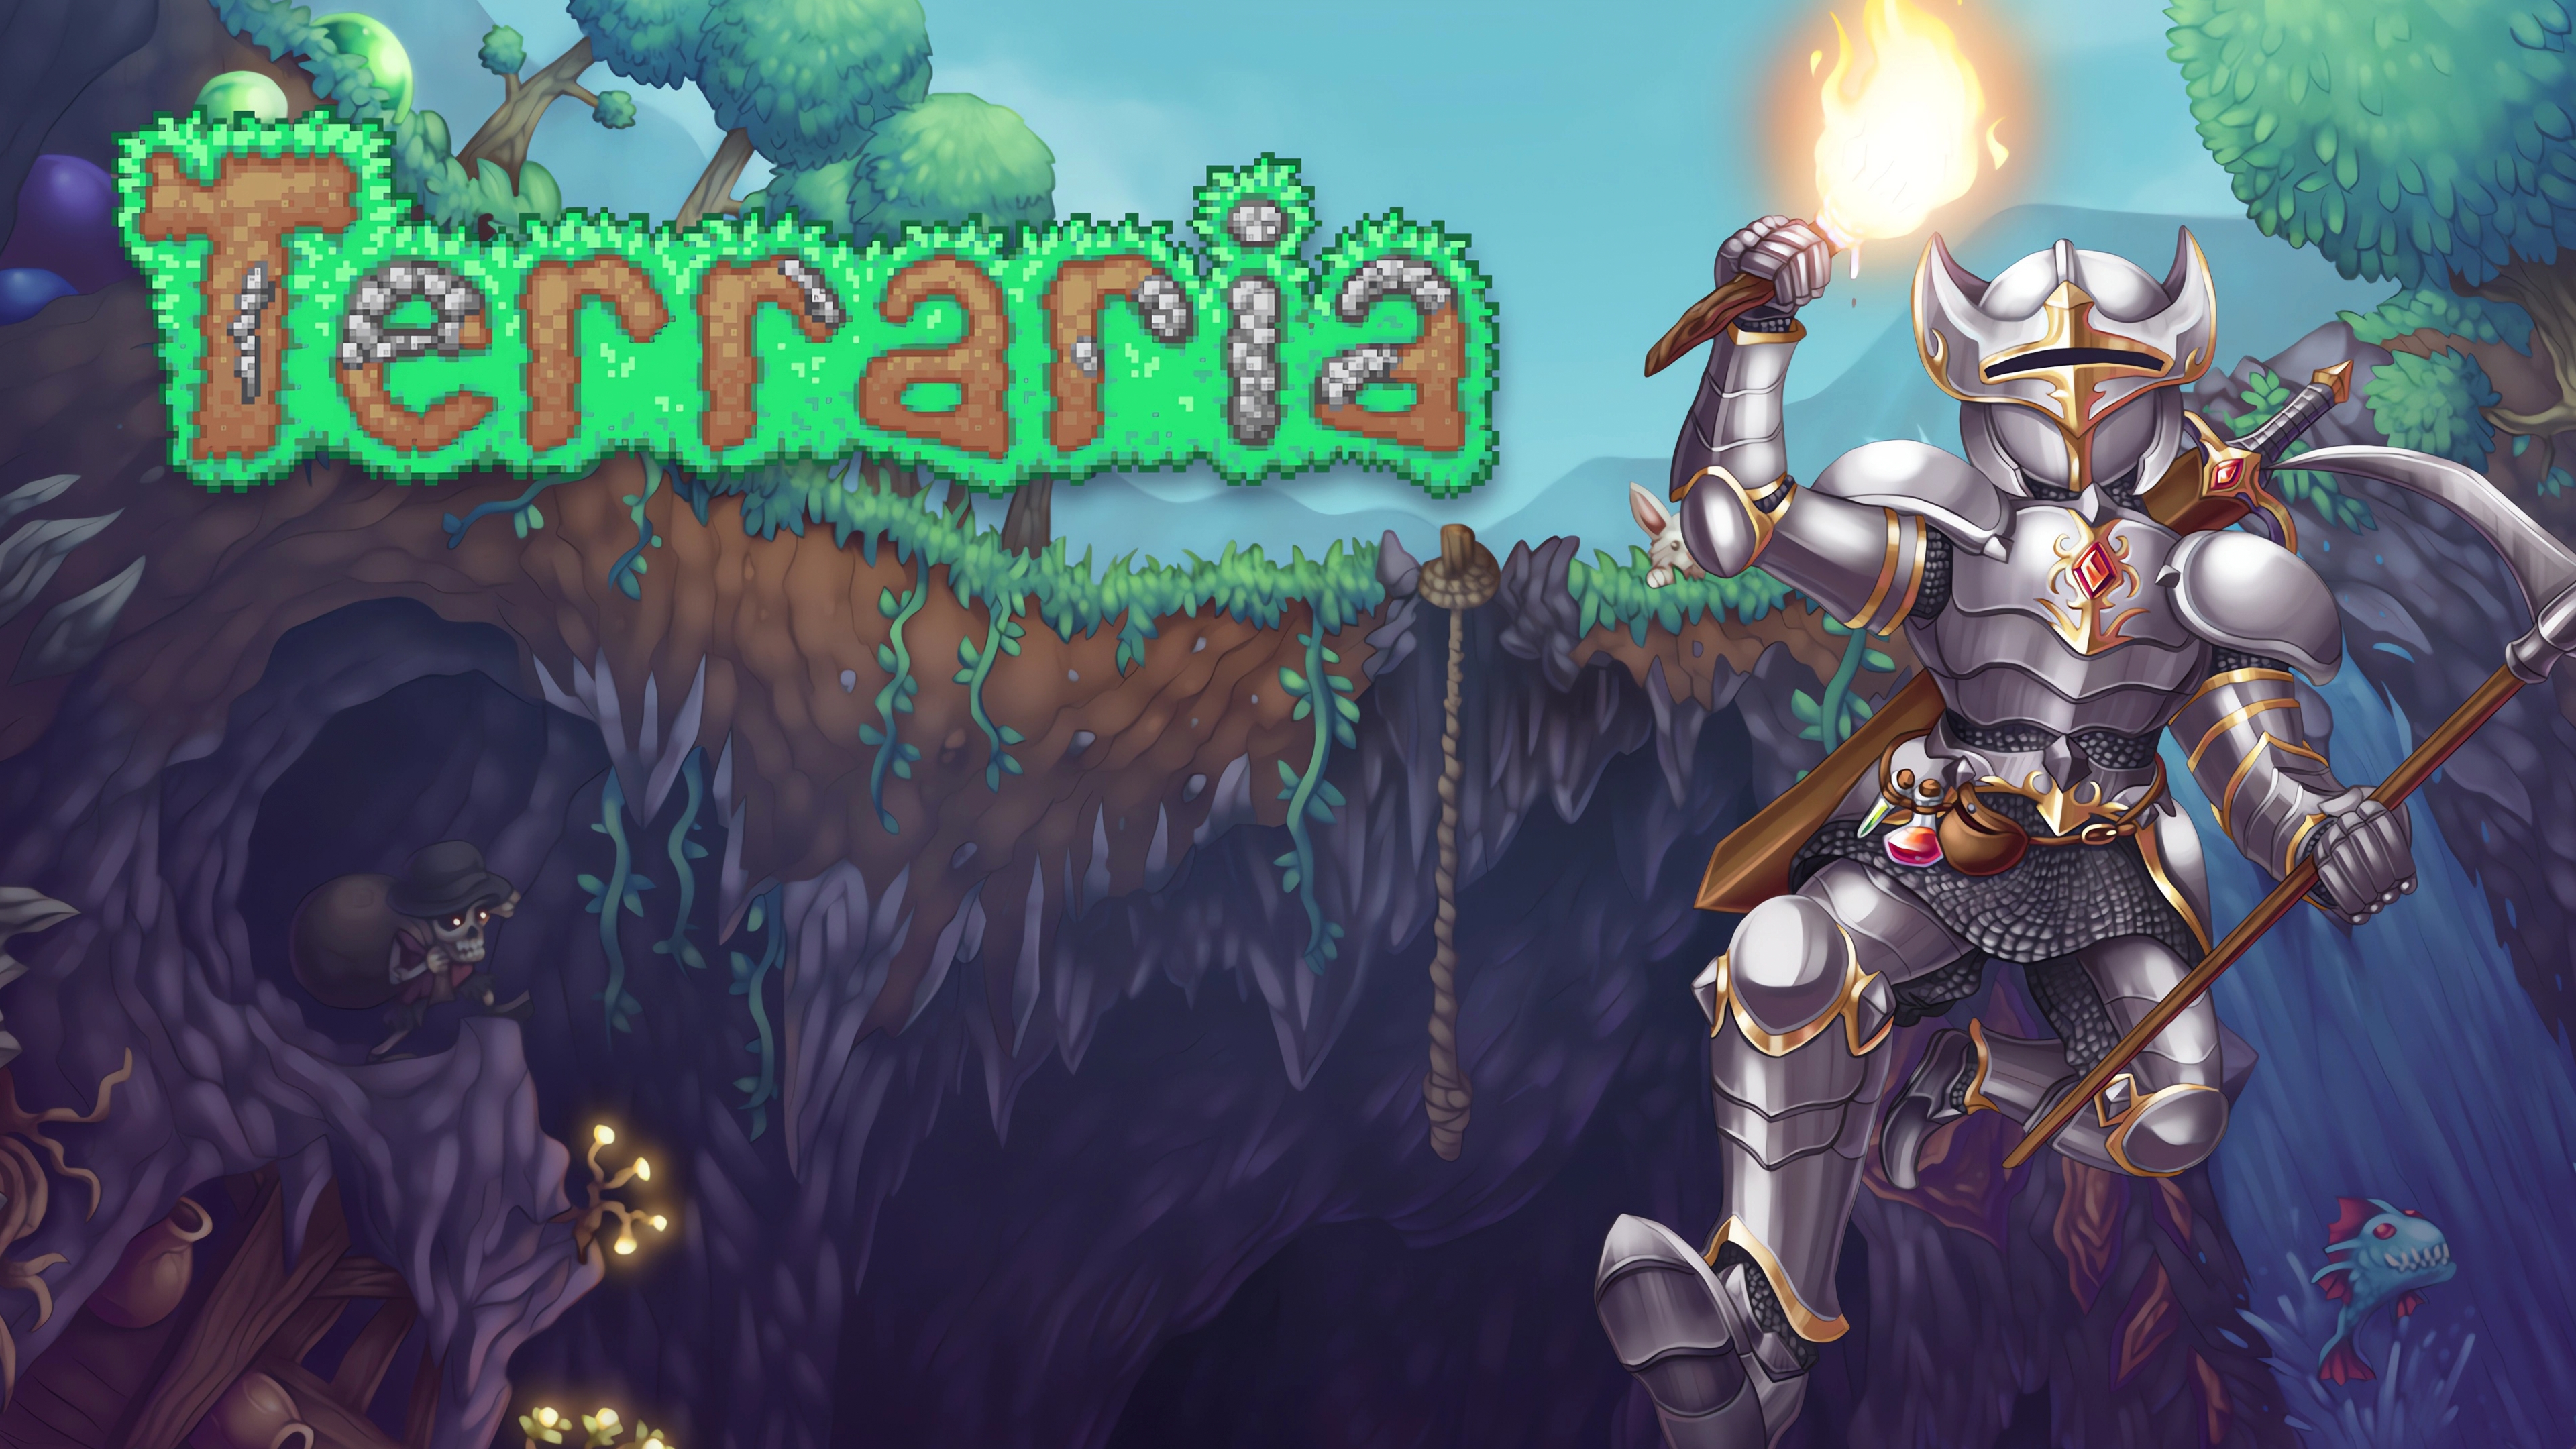 terraria download on pc